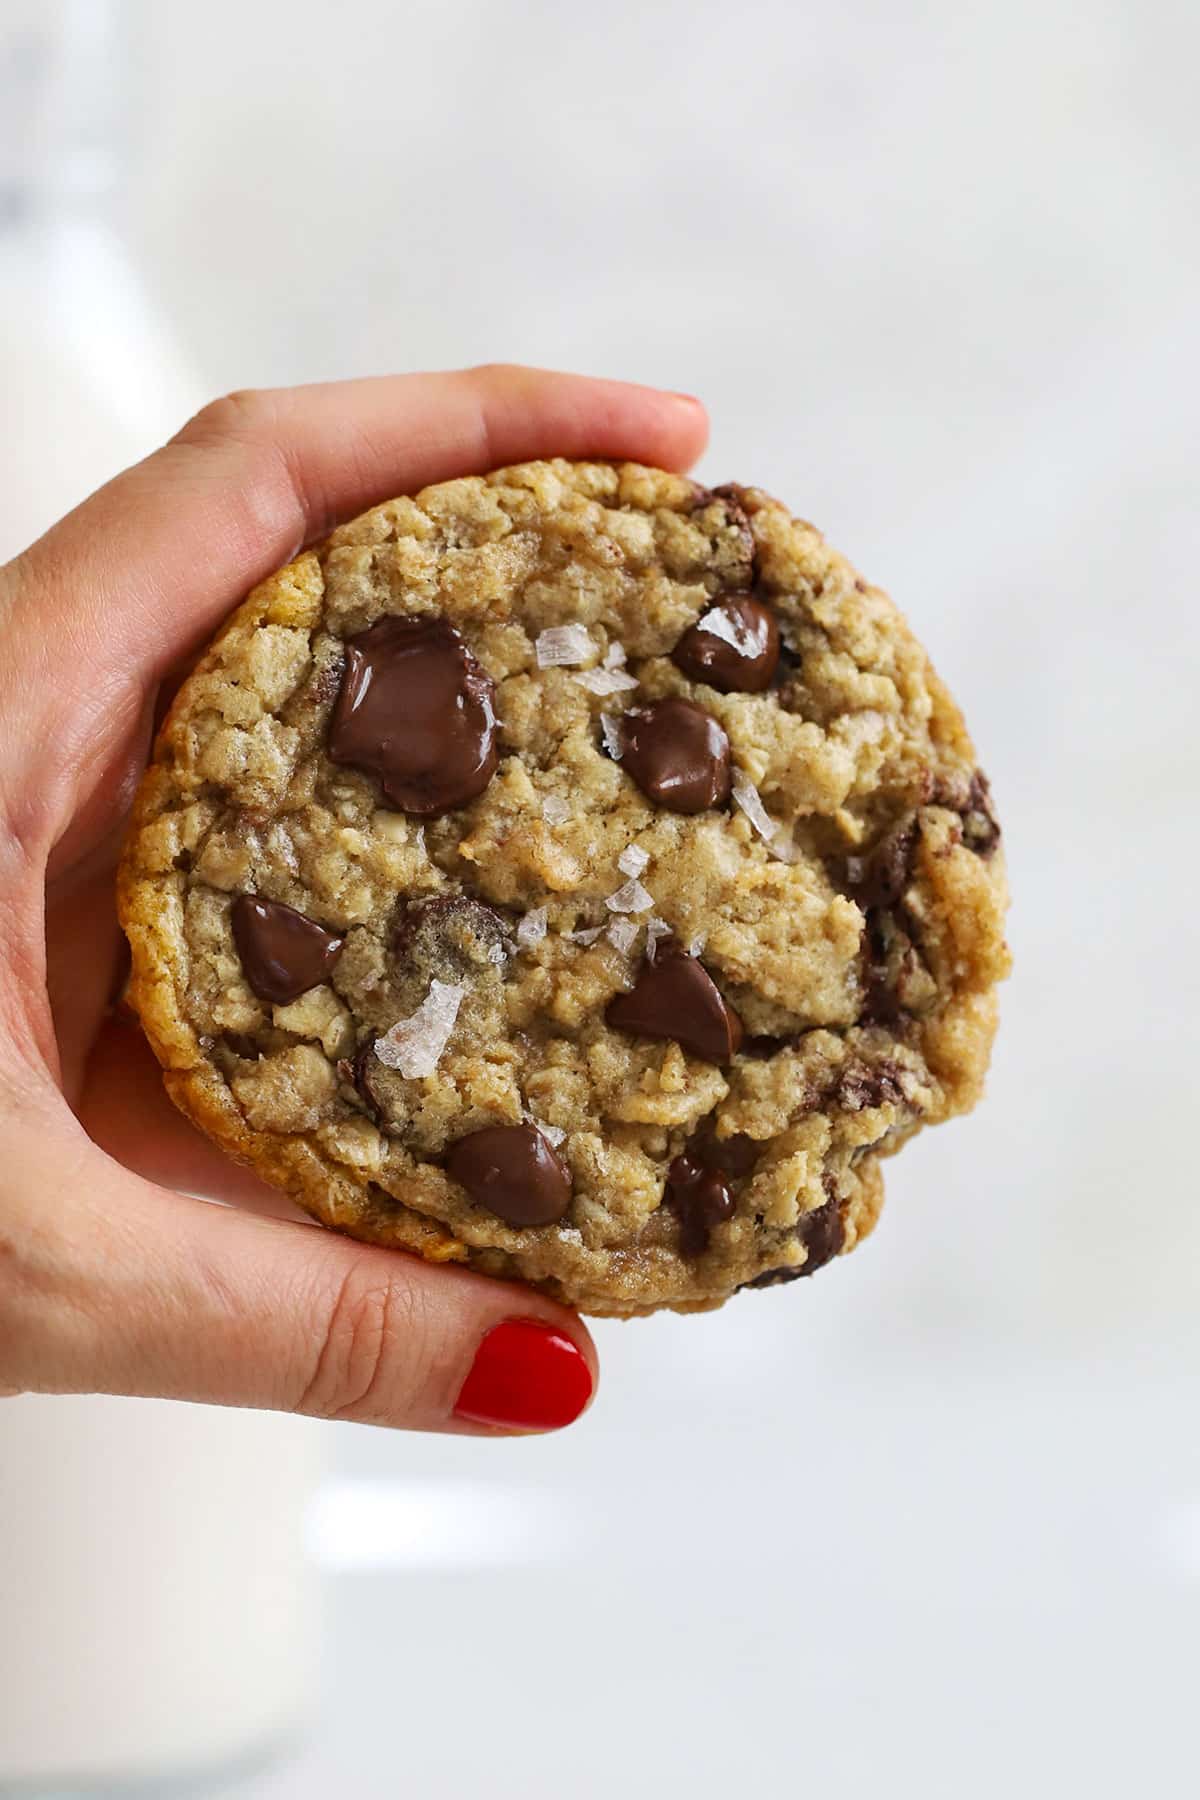 Hand holding a soft, chewy gluten-free oatmeal chocolate chip cookie